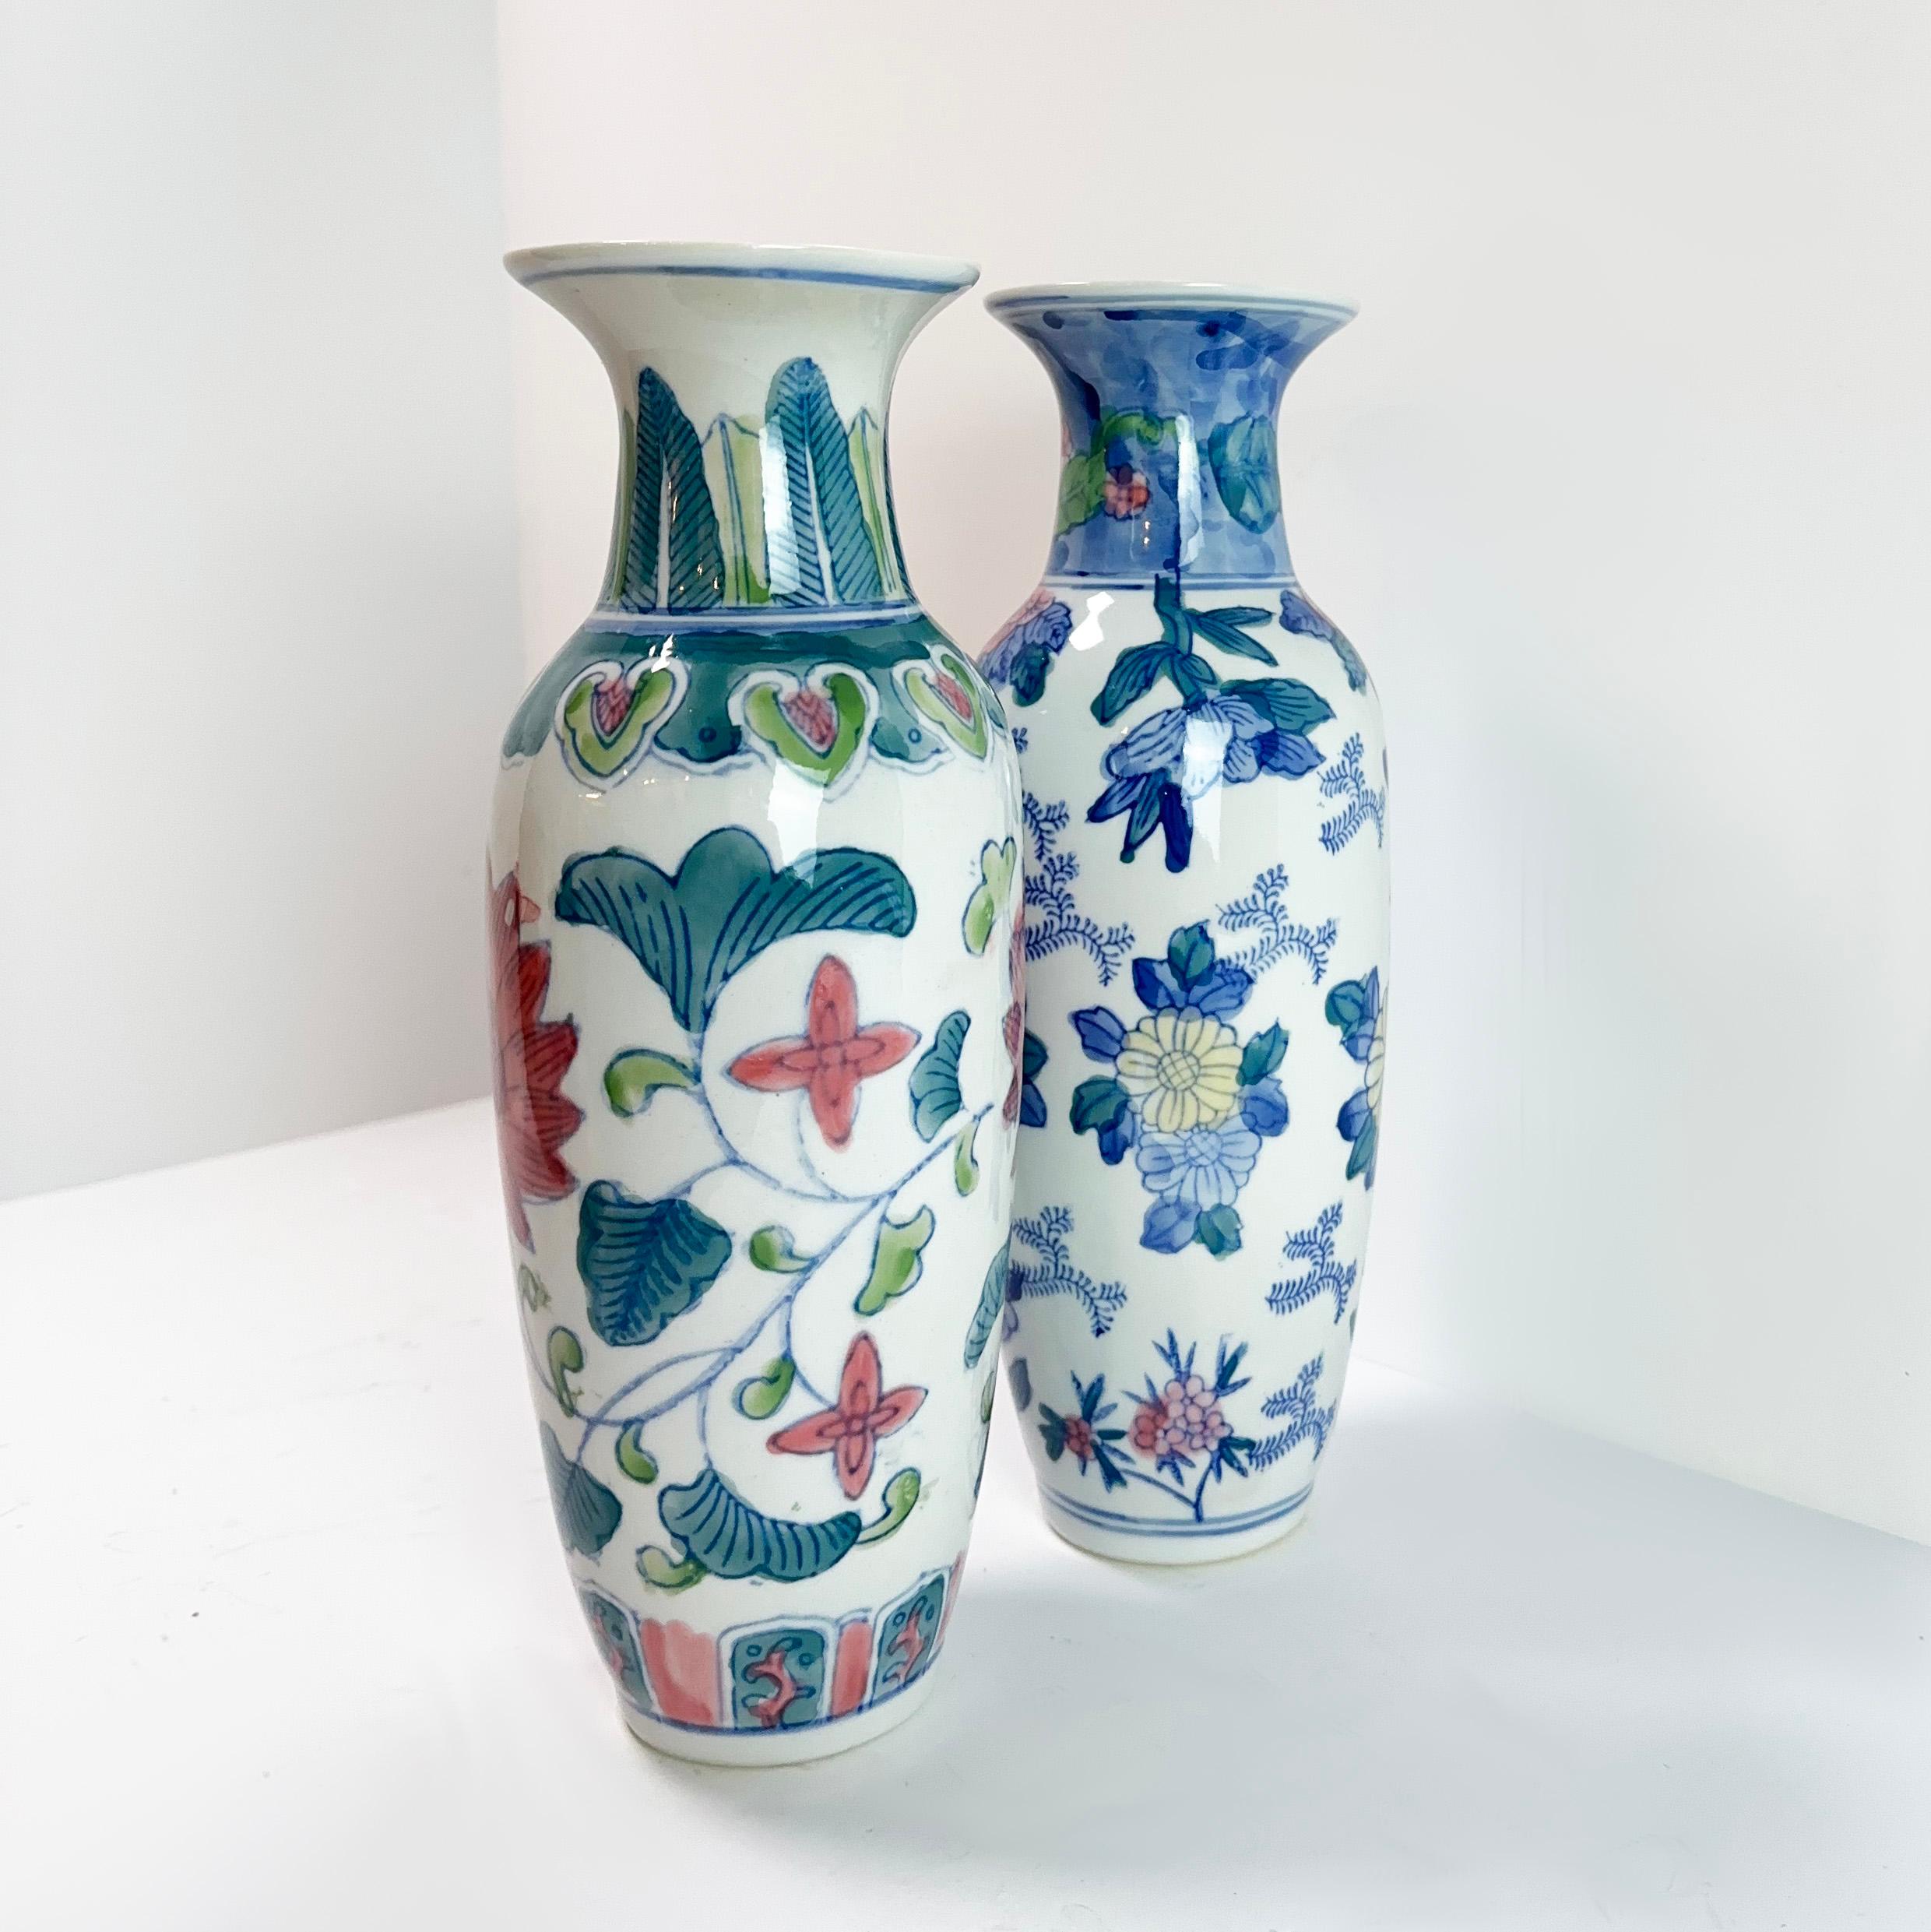 Embrace the charm of these small, mismatched Chinese porcelain vases, likely crafted in the 1980s. While the maker remains unknown, as the vases are unstamped, their allure is unmistakable. 

Made from porcelain and coloured glaze, these vases